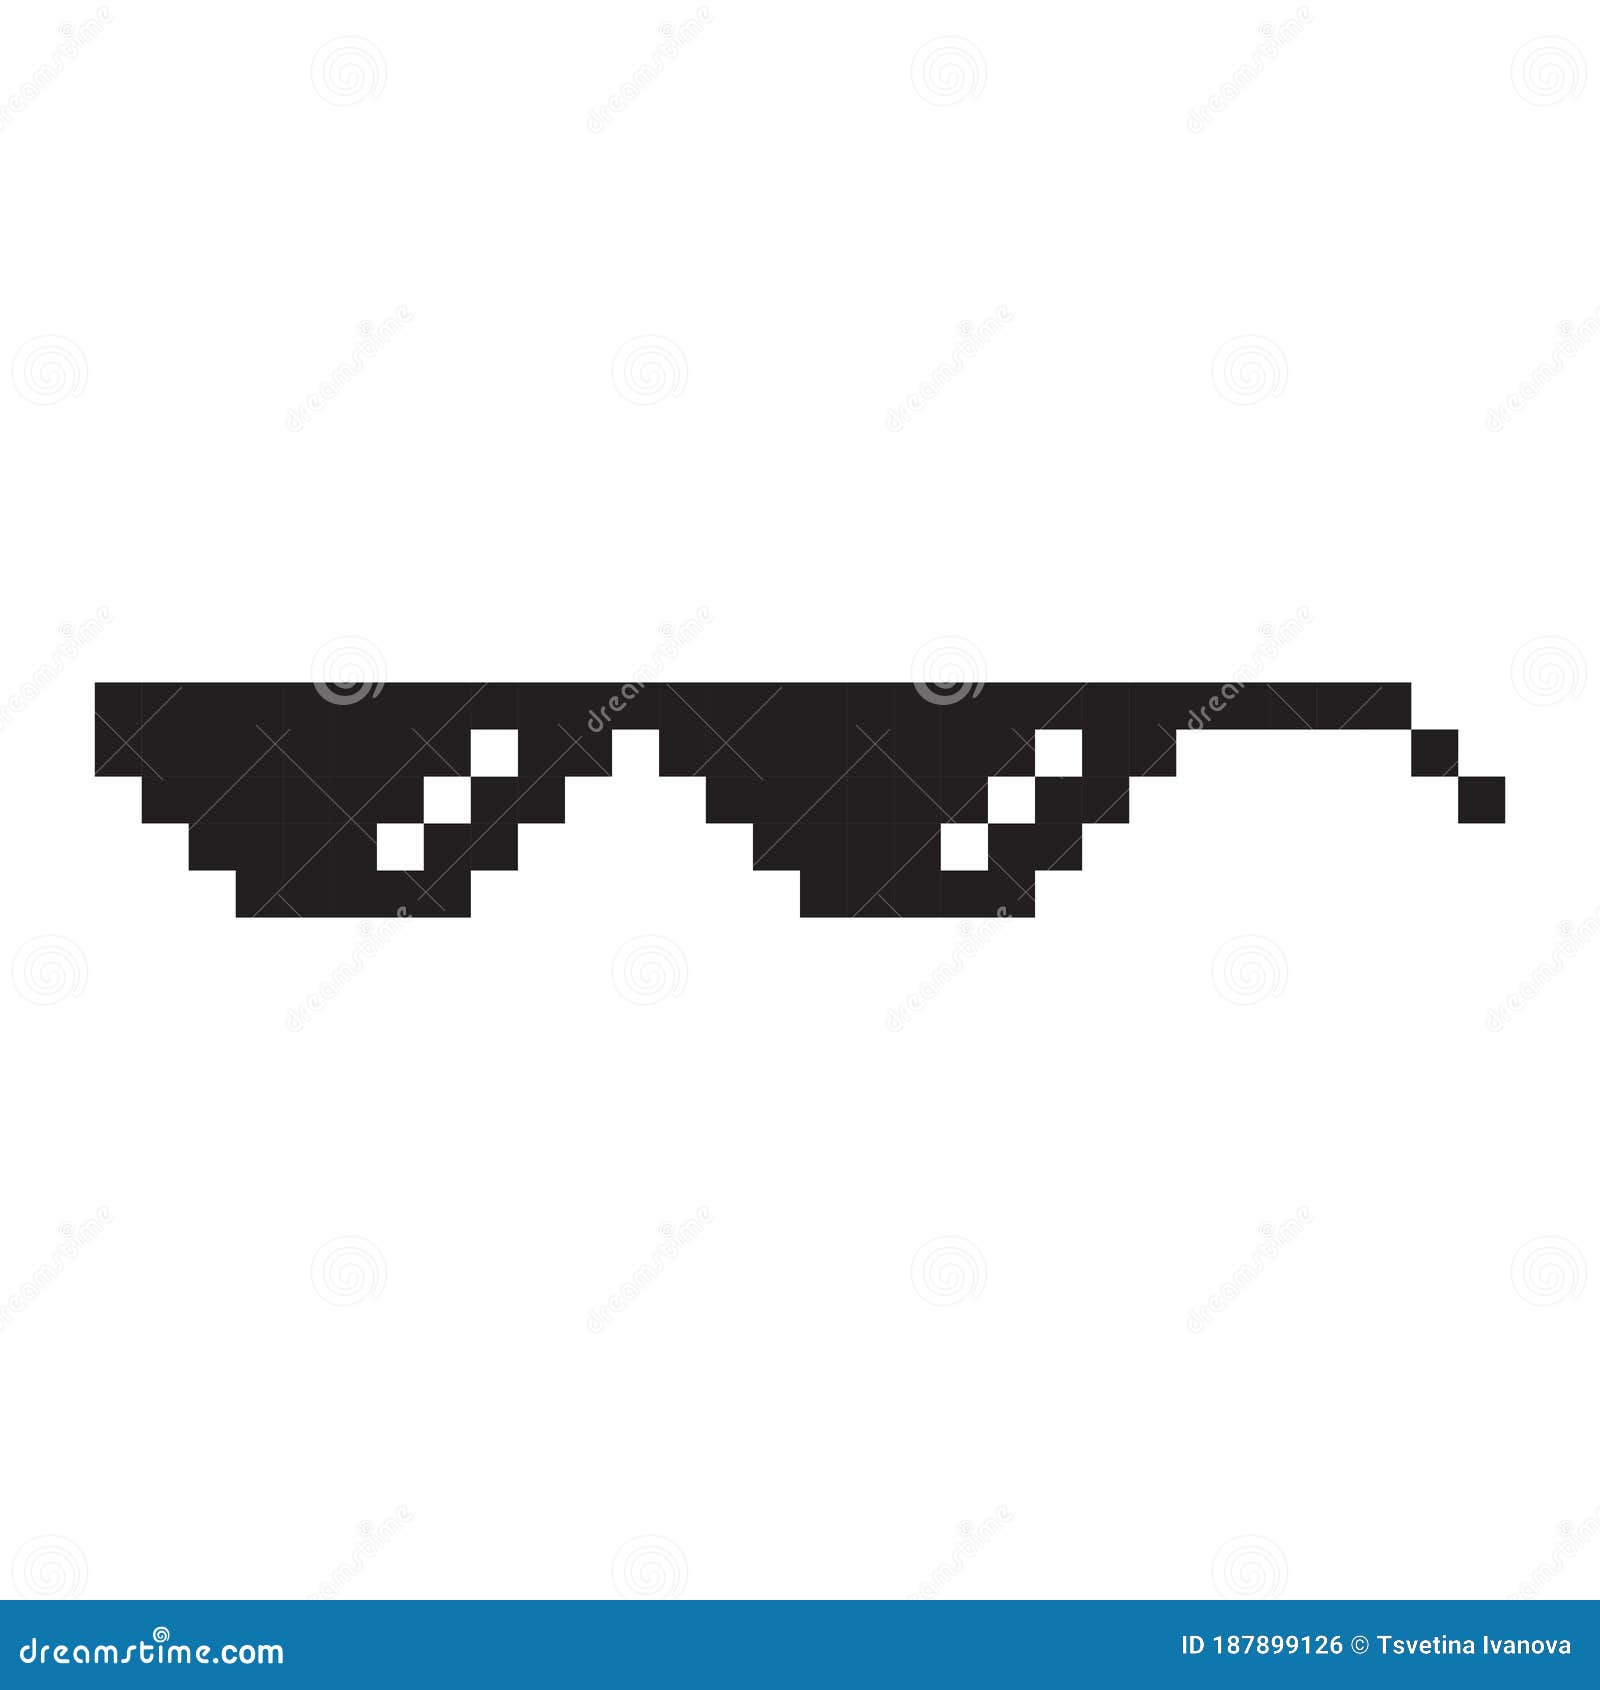 Sunglasses Pixel Style Vector Icon Stock Vector Illustration Of Pixelated Fashion 187899126